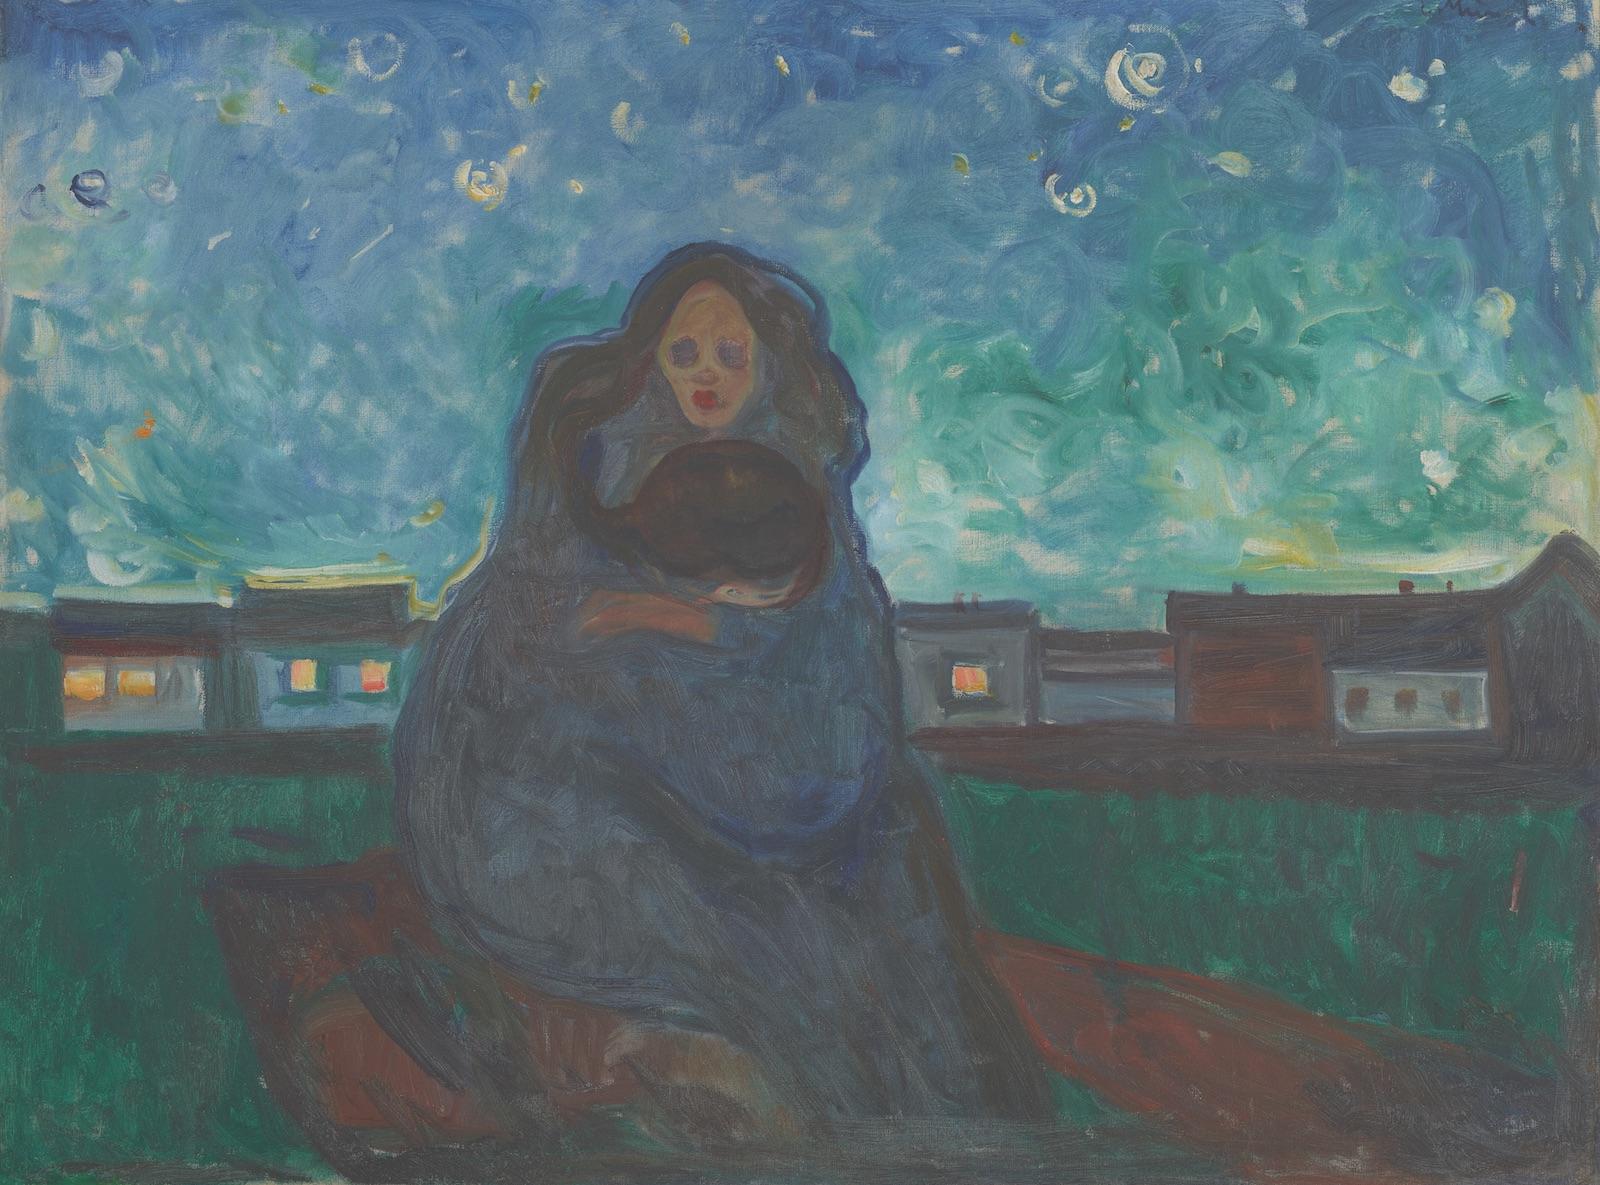 “Under the Stars” (1900-5) by Edvard Munch